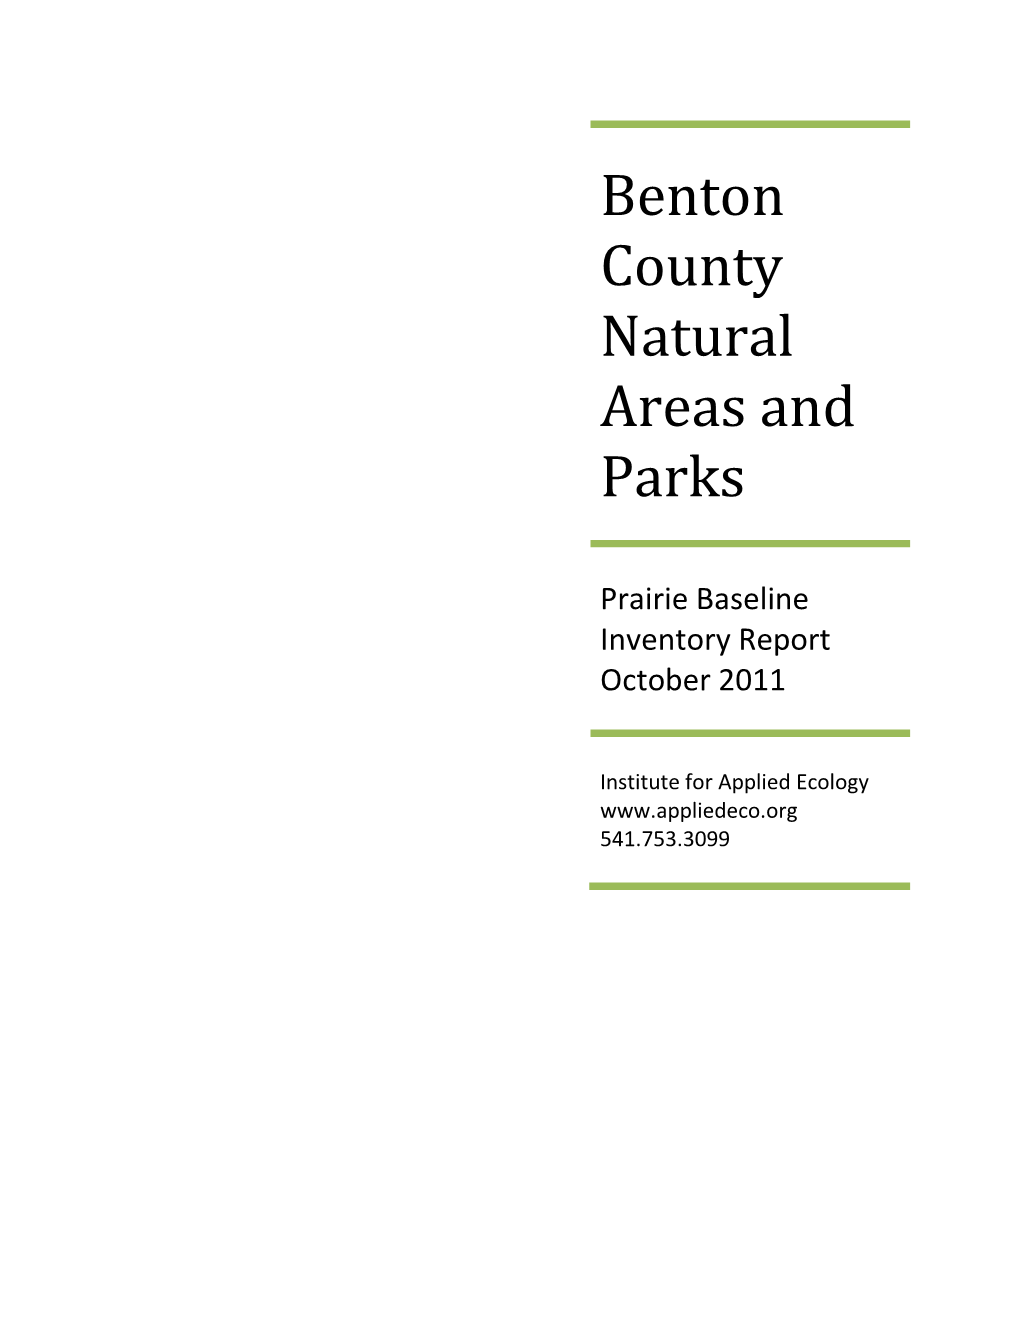 Benton County Natural Areas and Parks